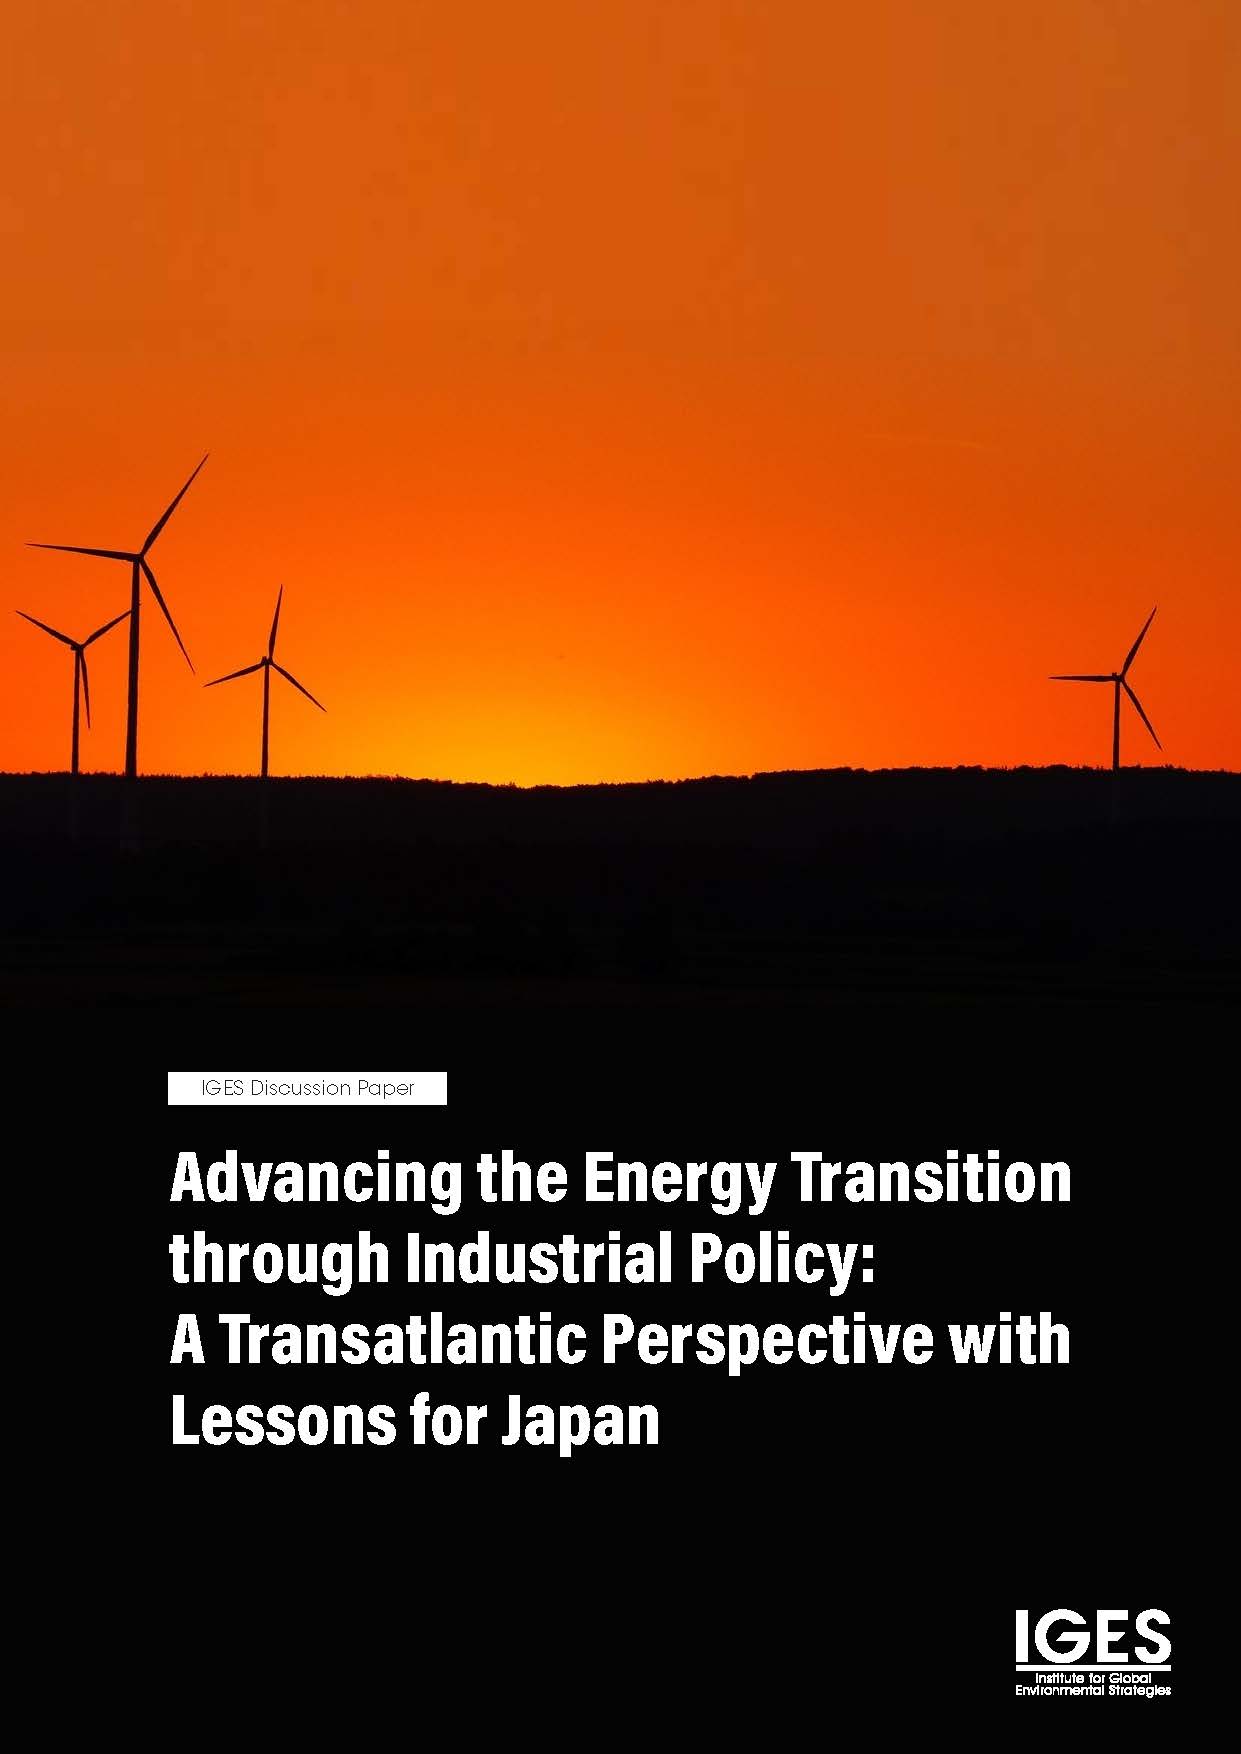 Advancing the Energy Transition through Industrial Policy: A Transatlantic Perspective with Lessons for Japan